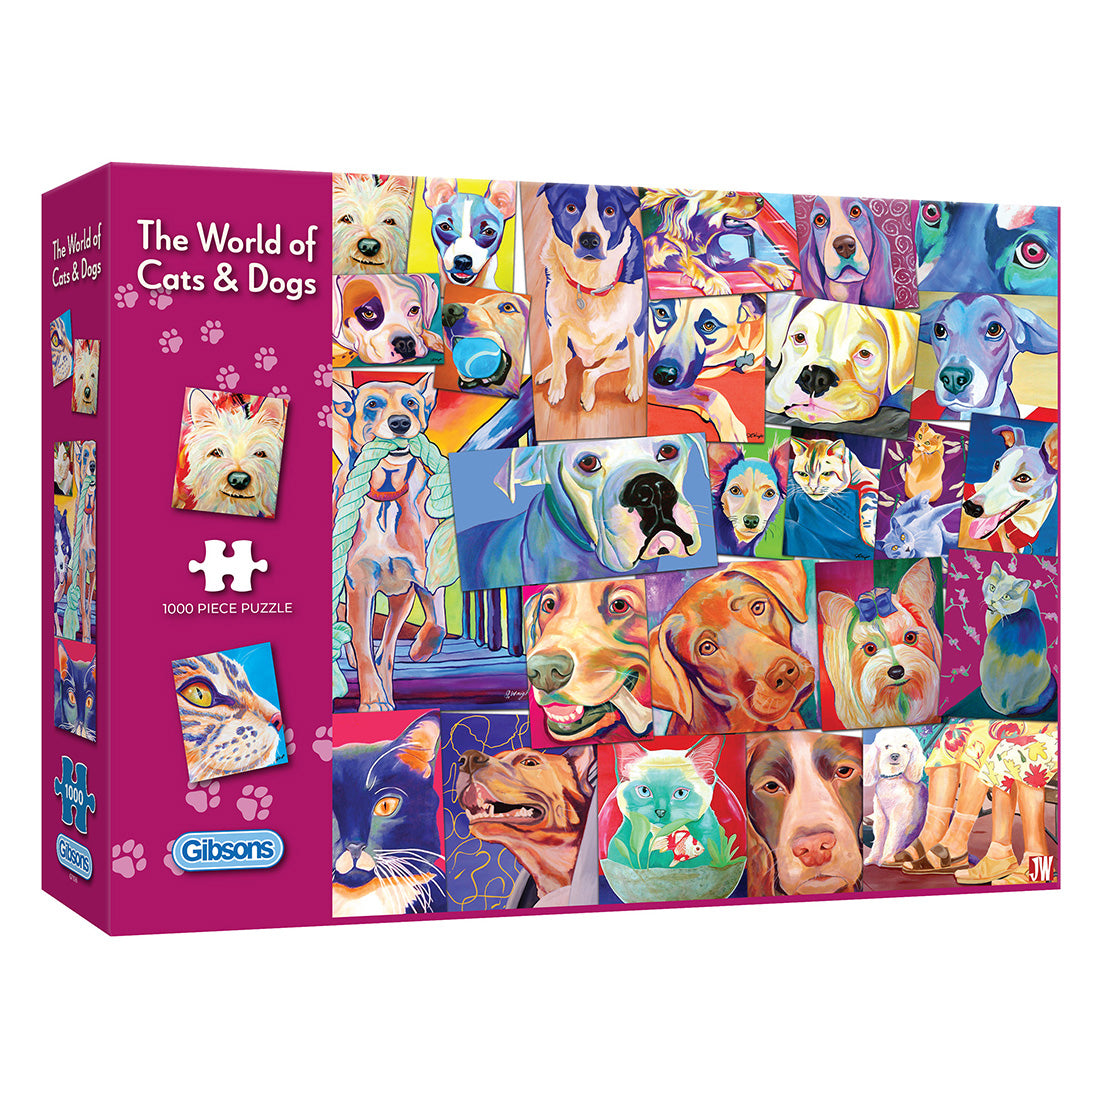 Gibsons - The World of Cats & Dogs - 1000 Piece Jigsaw Puzzle